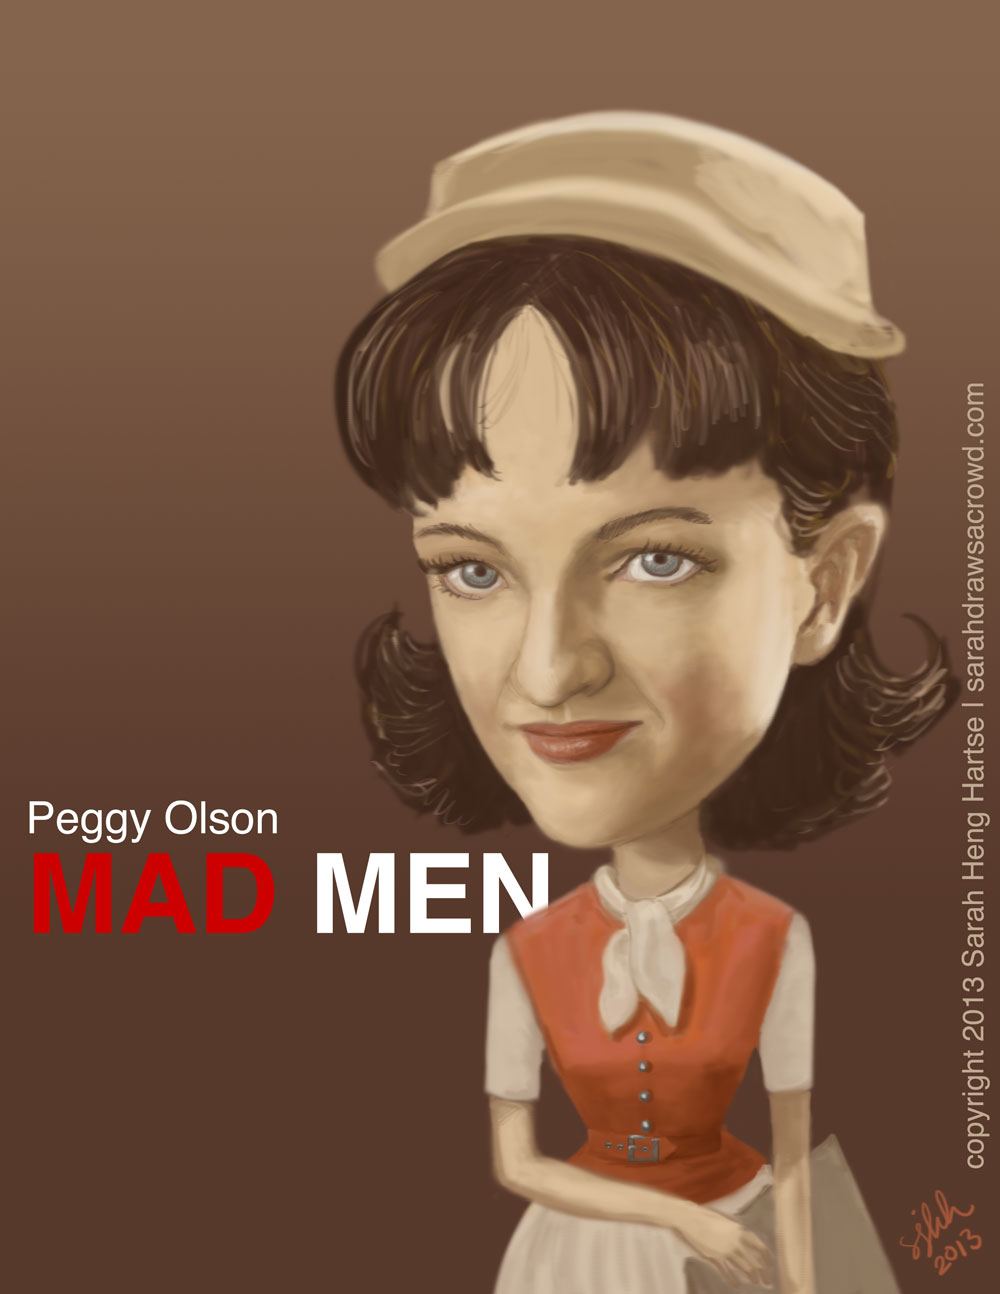 Celebrity Caricature - Mad Men's Peggy Olson played by actress Elisabeth Moss